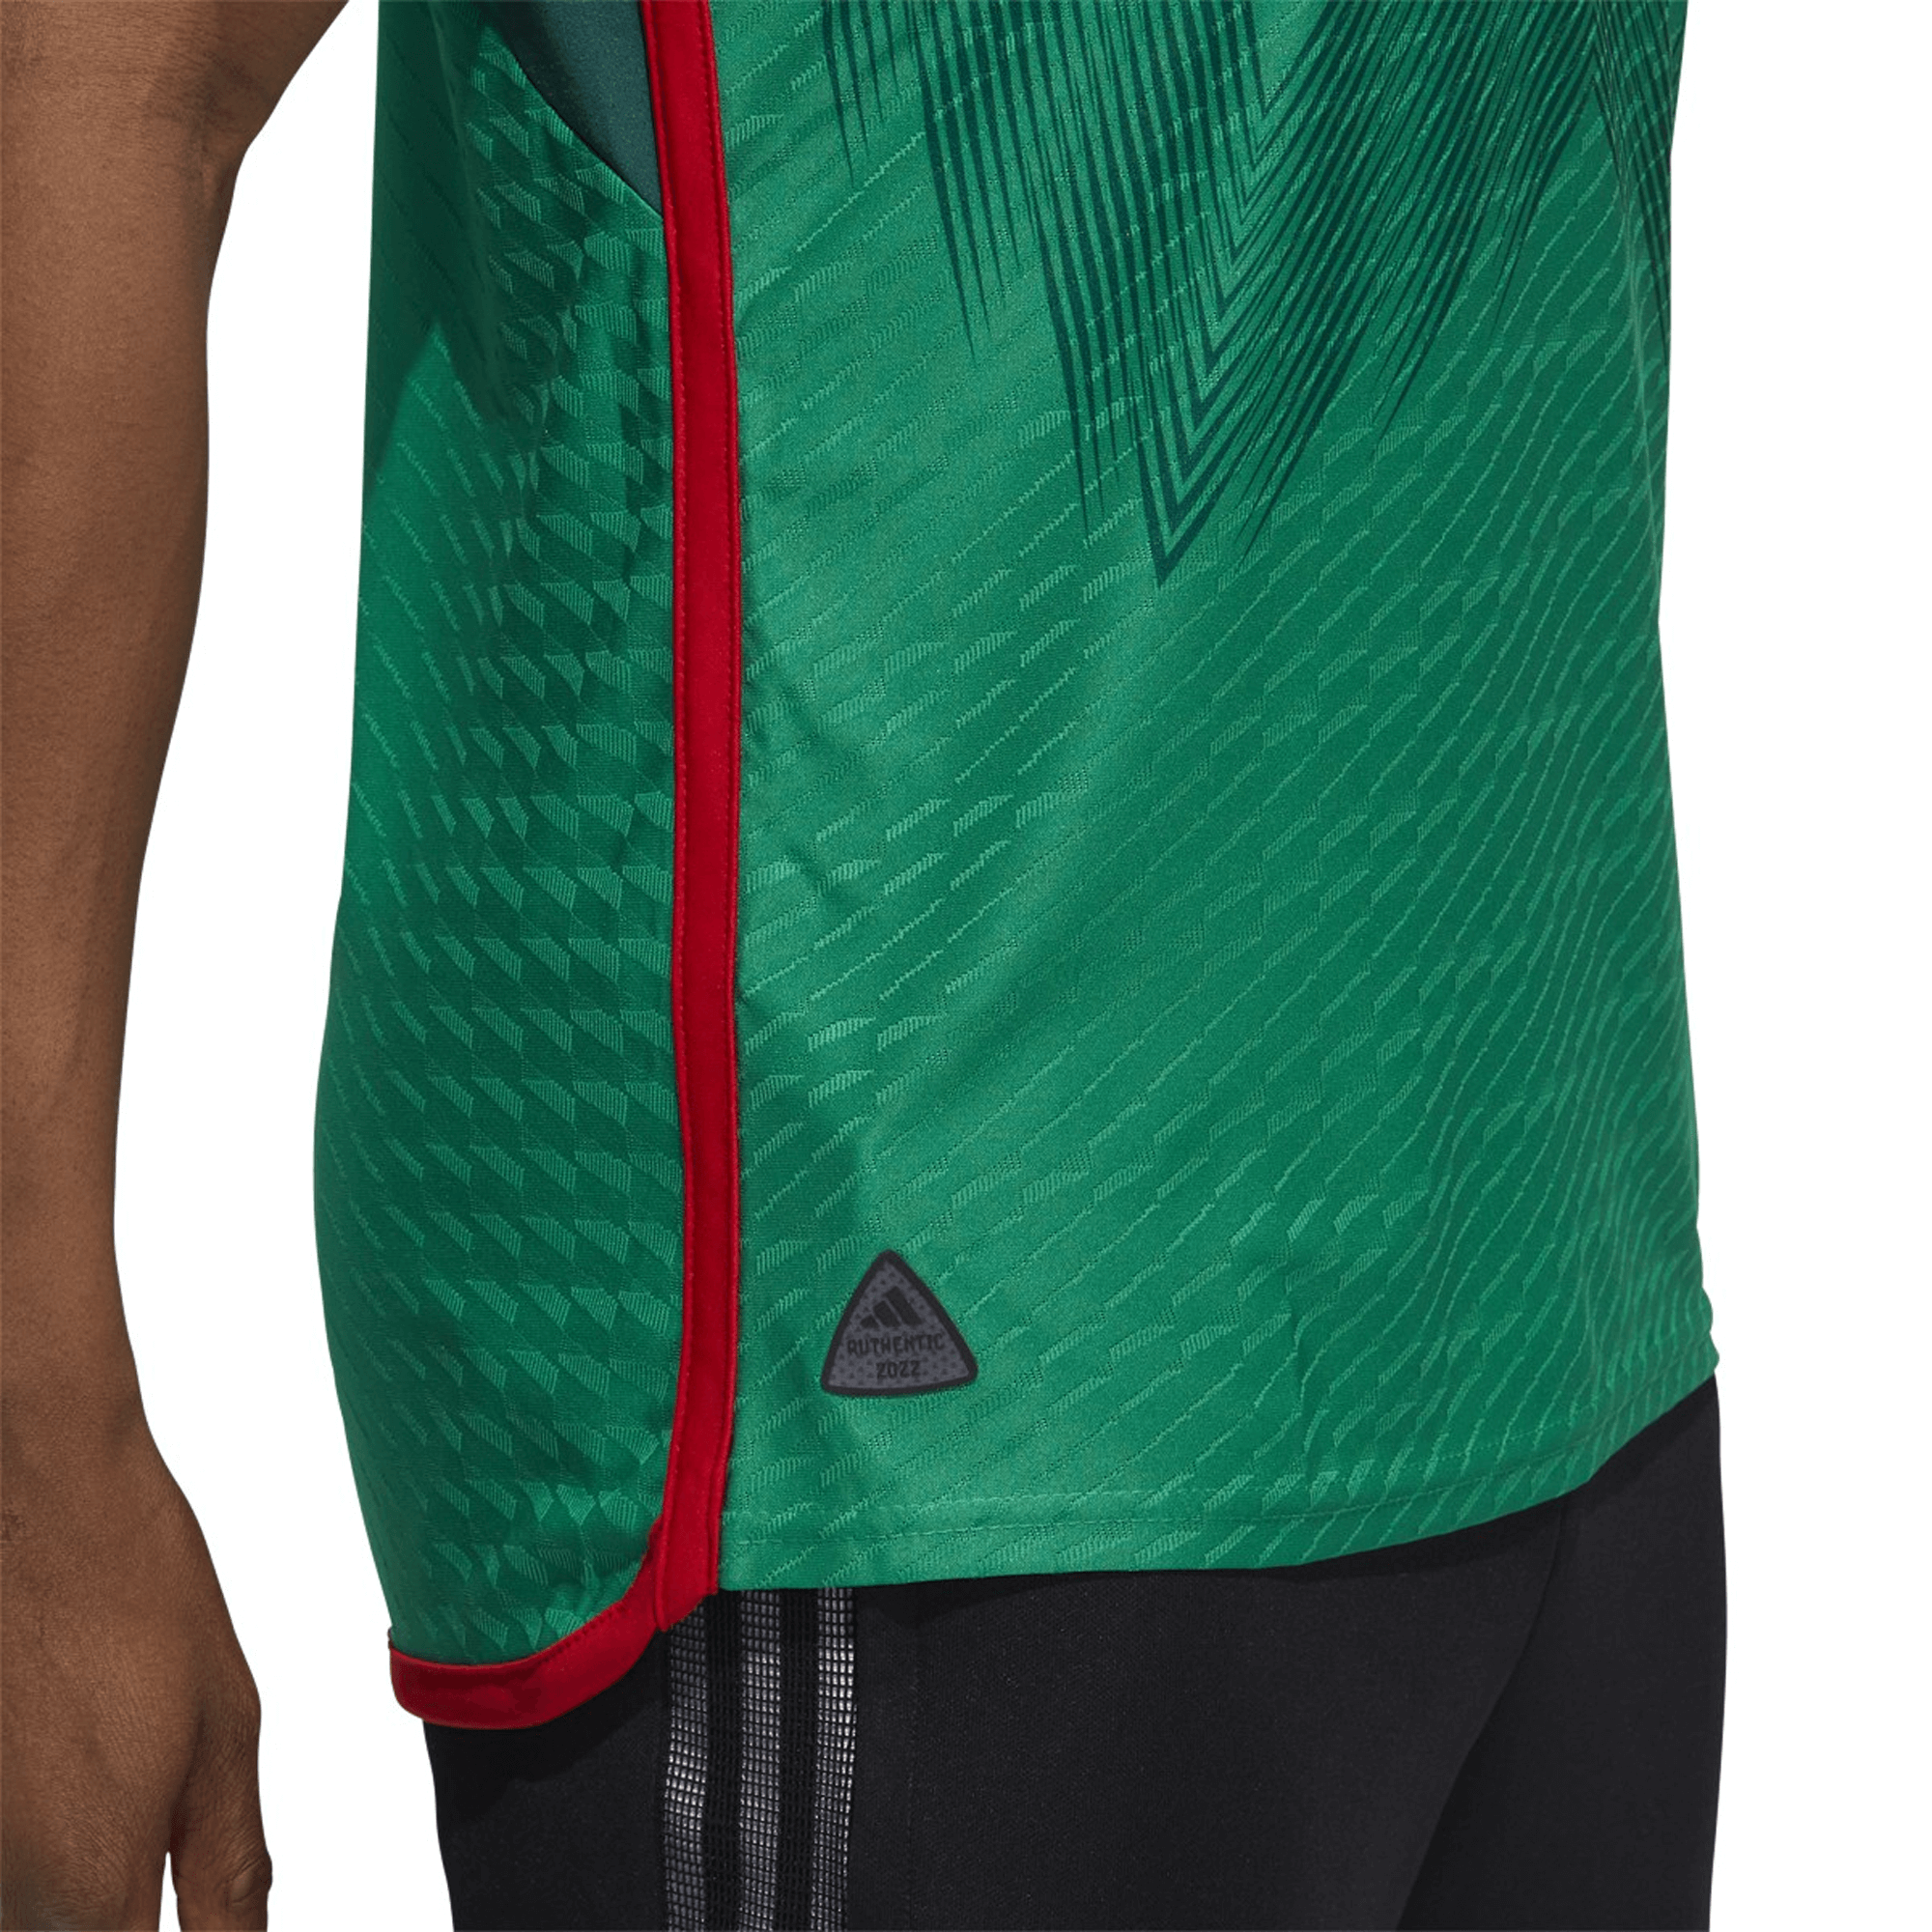 ADIDAS MEXICO 2021 AUTHENTIC JERSEY